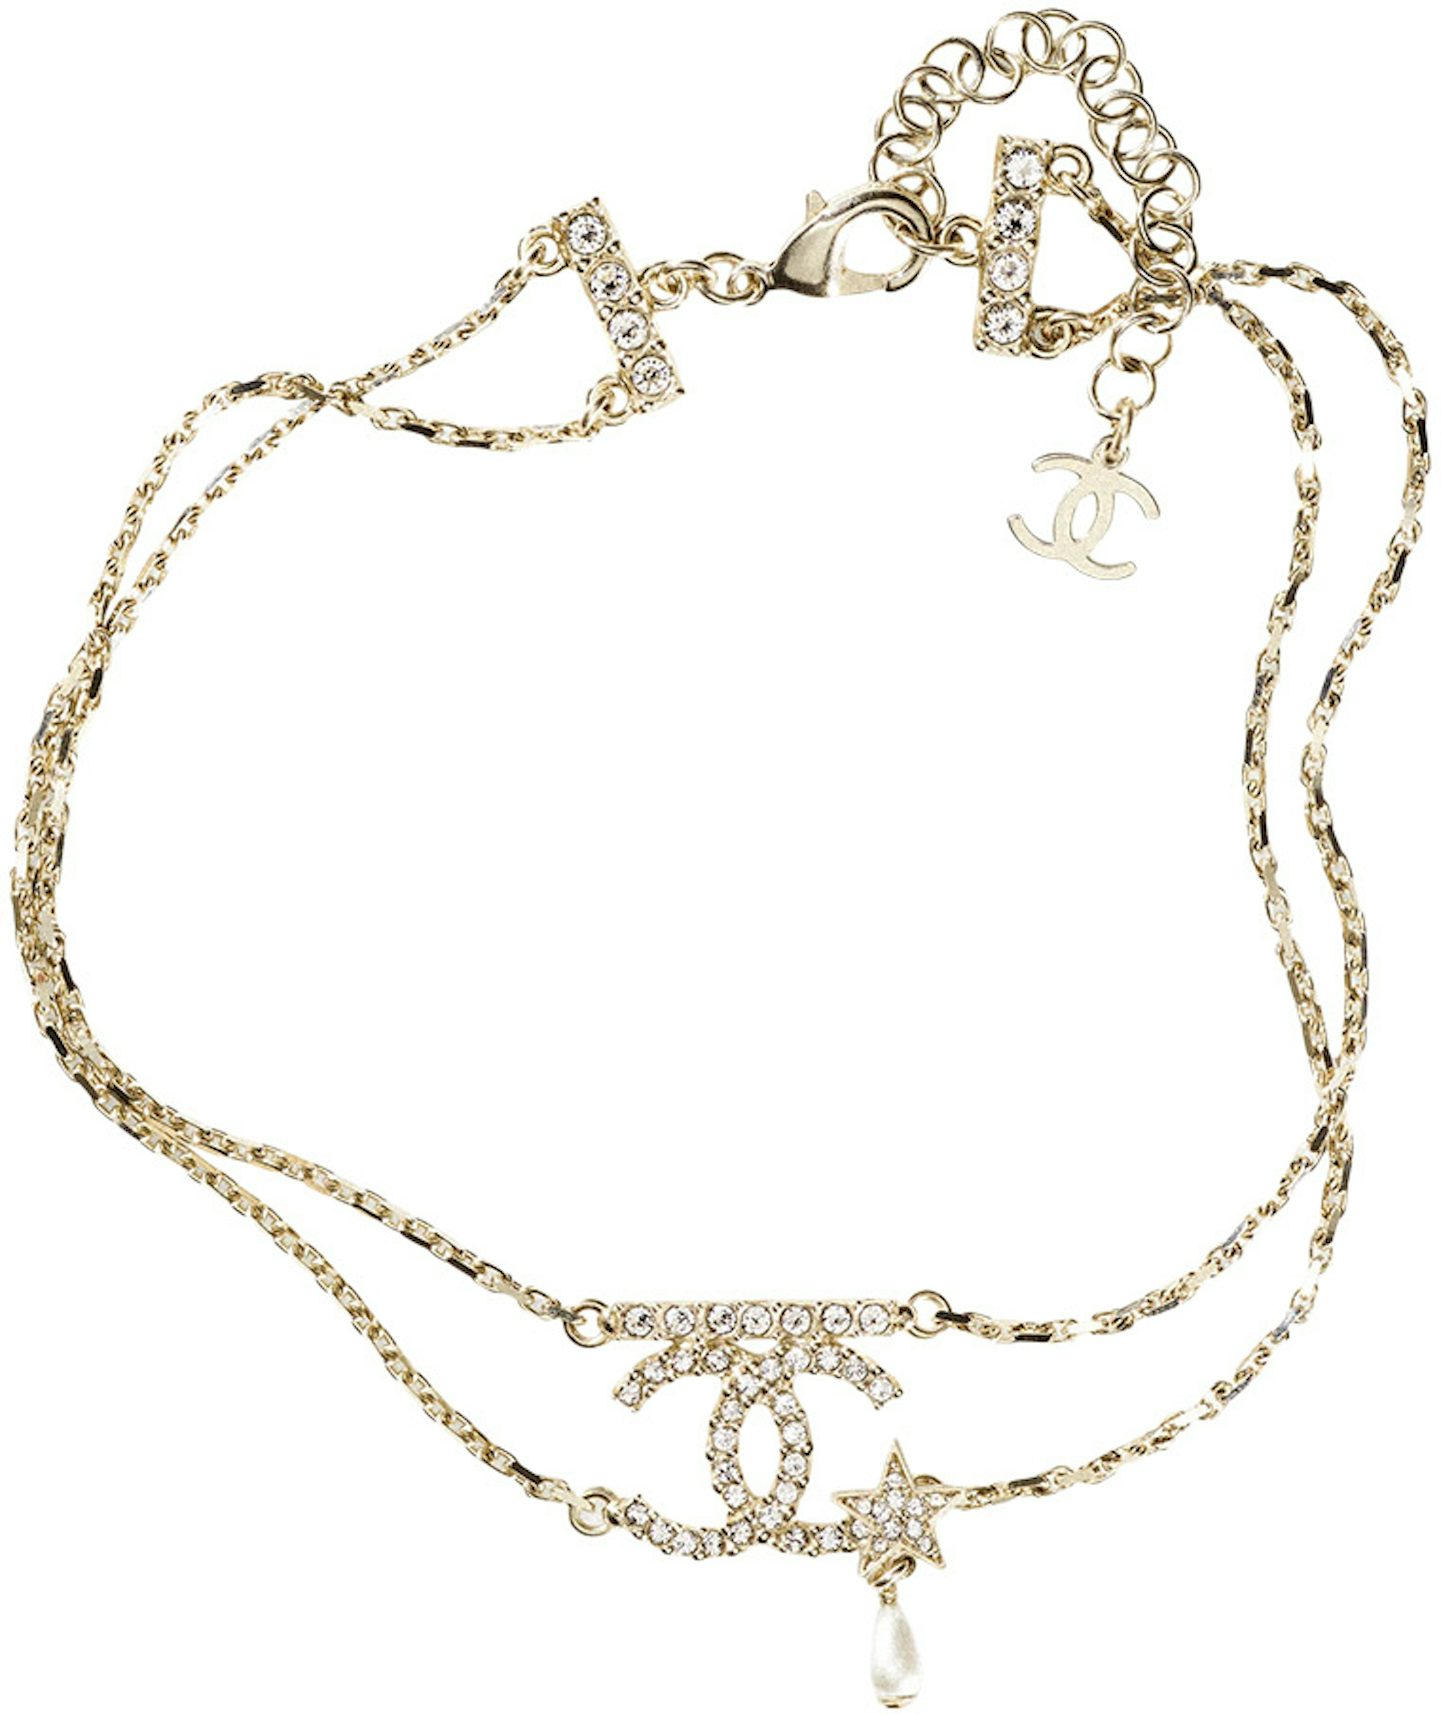 Chanel Choker Necklace AB8050 Gold/White